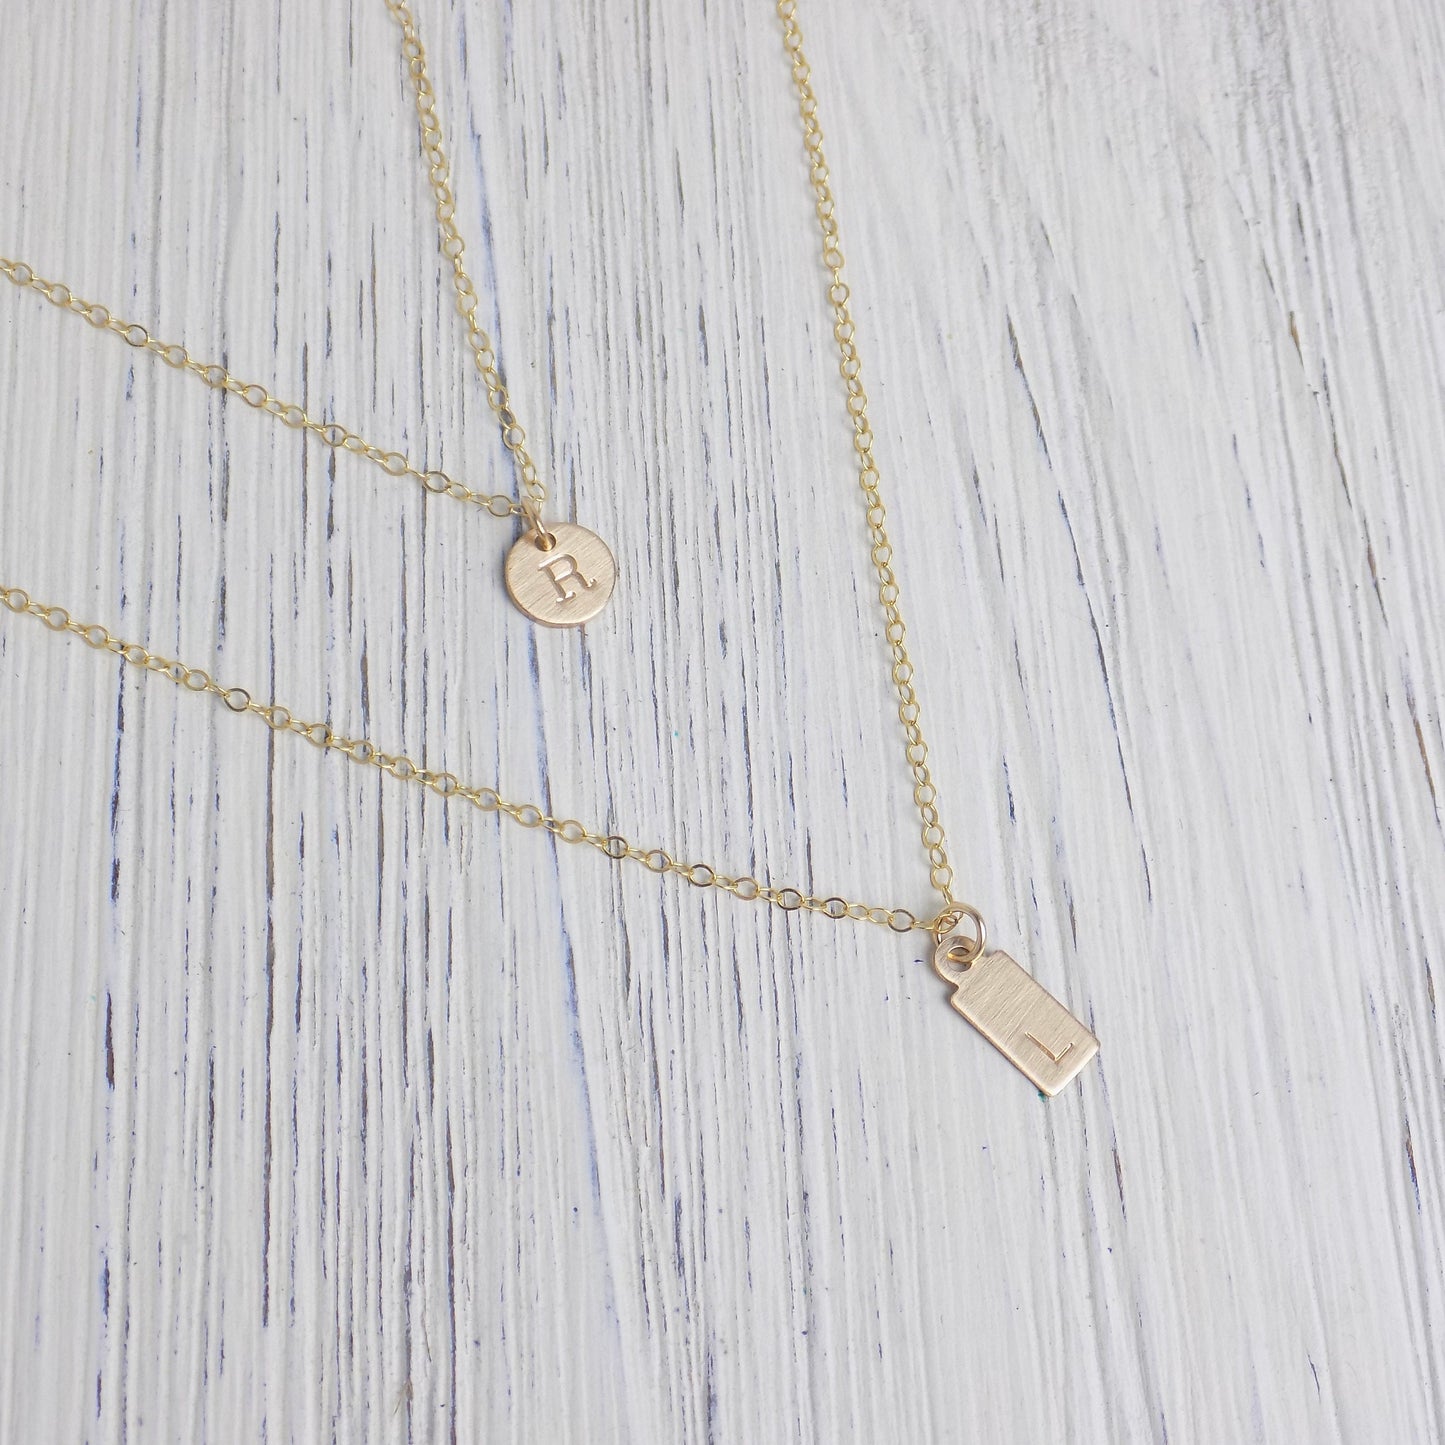 Layered Initial Necklaces - Dainty Initial Necklace Set Of 2 - 14K Gold Filled Brushed Matte Satin Finish - Christmas Gift Women - Z1-61